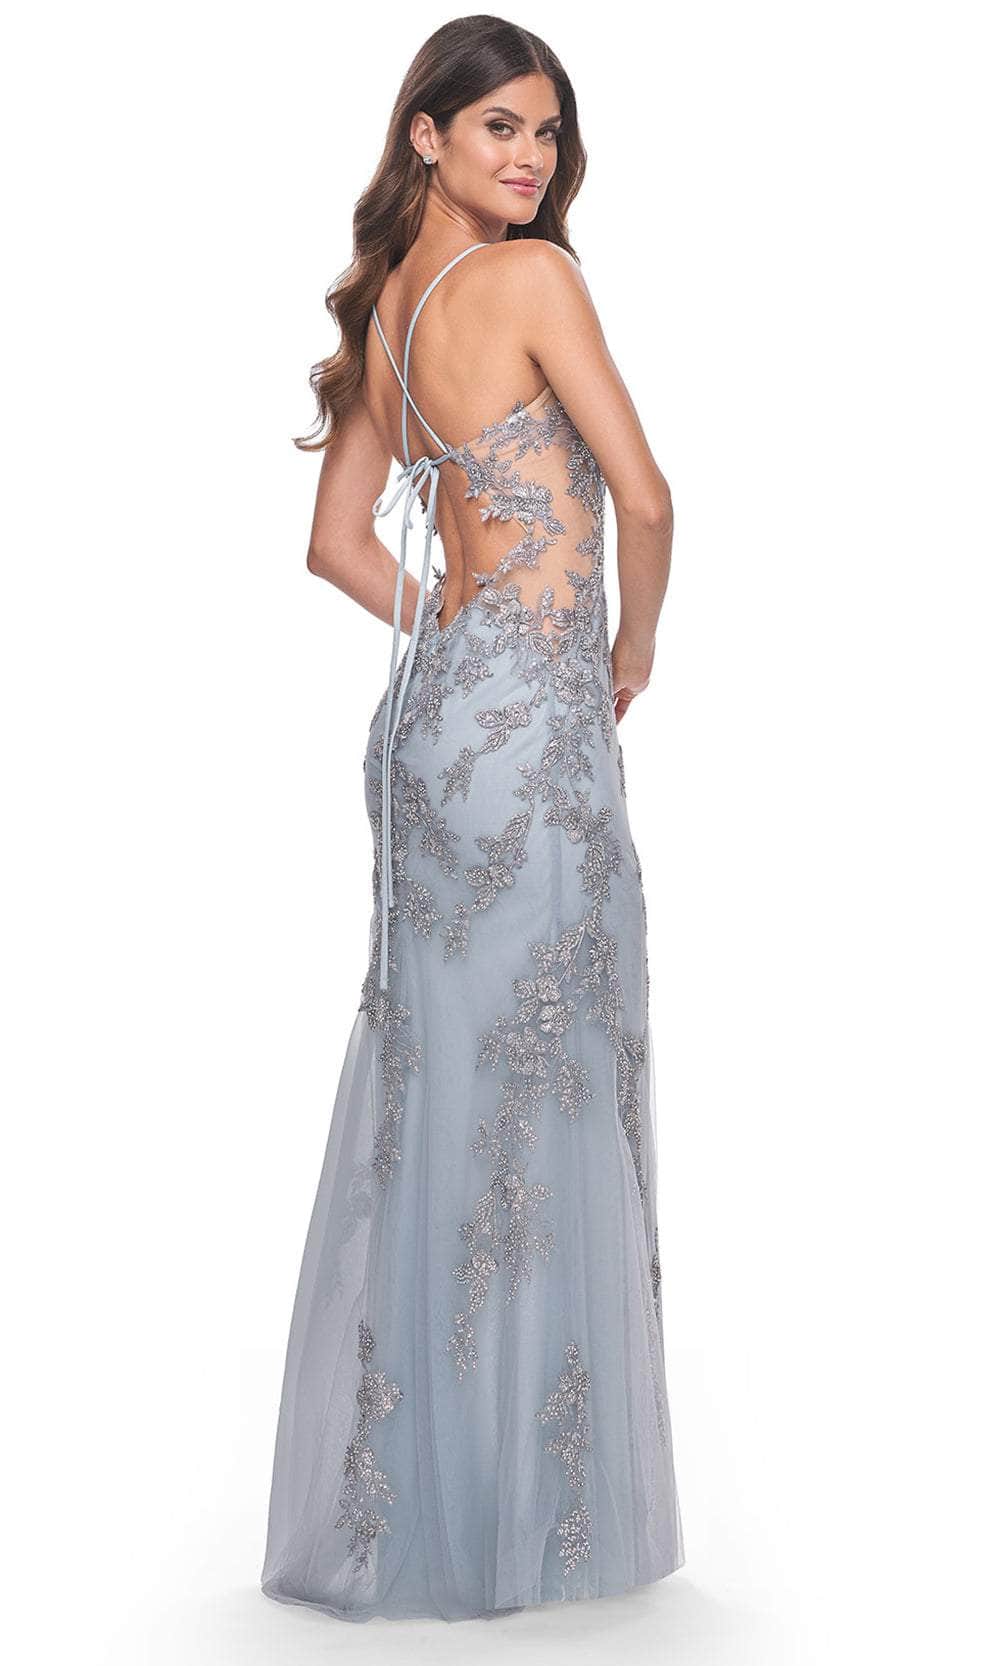 La Femme 32074 - Lace-Up Back Illusion Side Prom Gown Prom Dresses